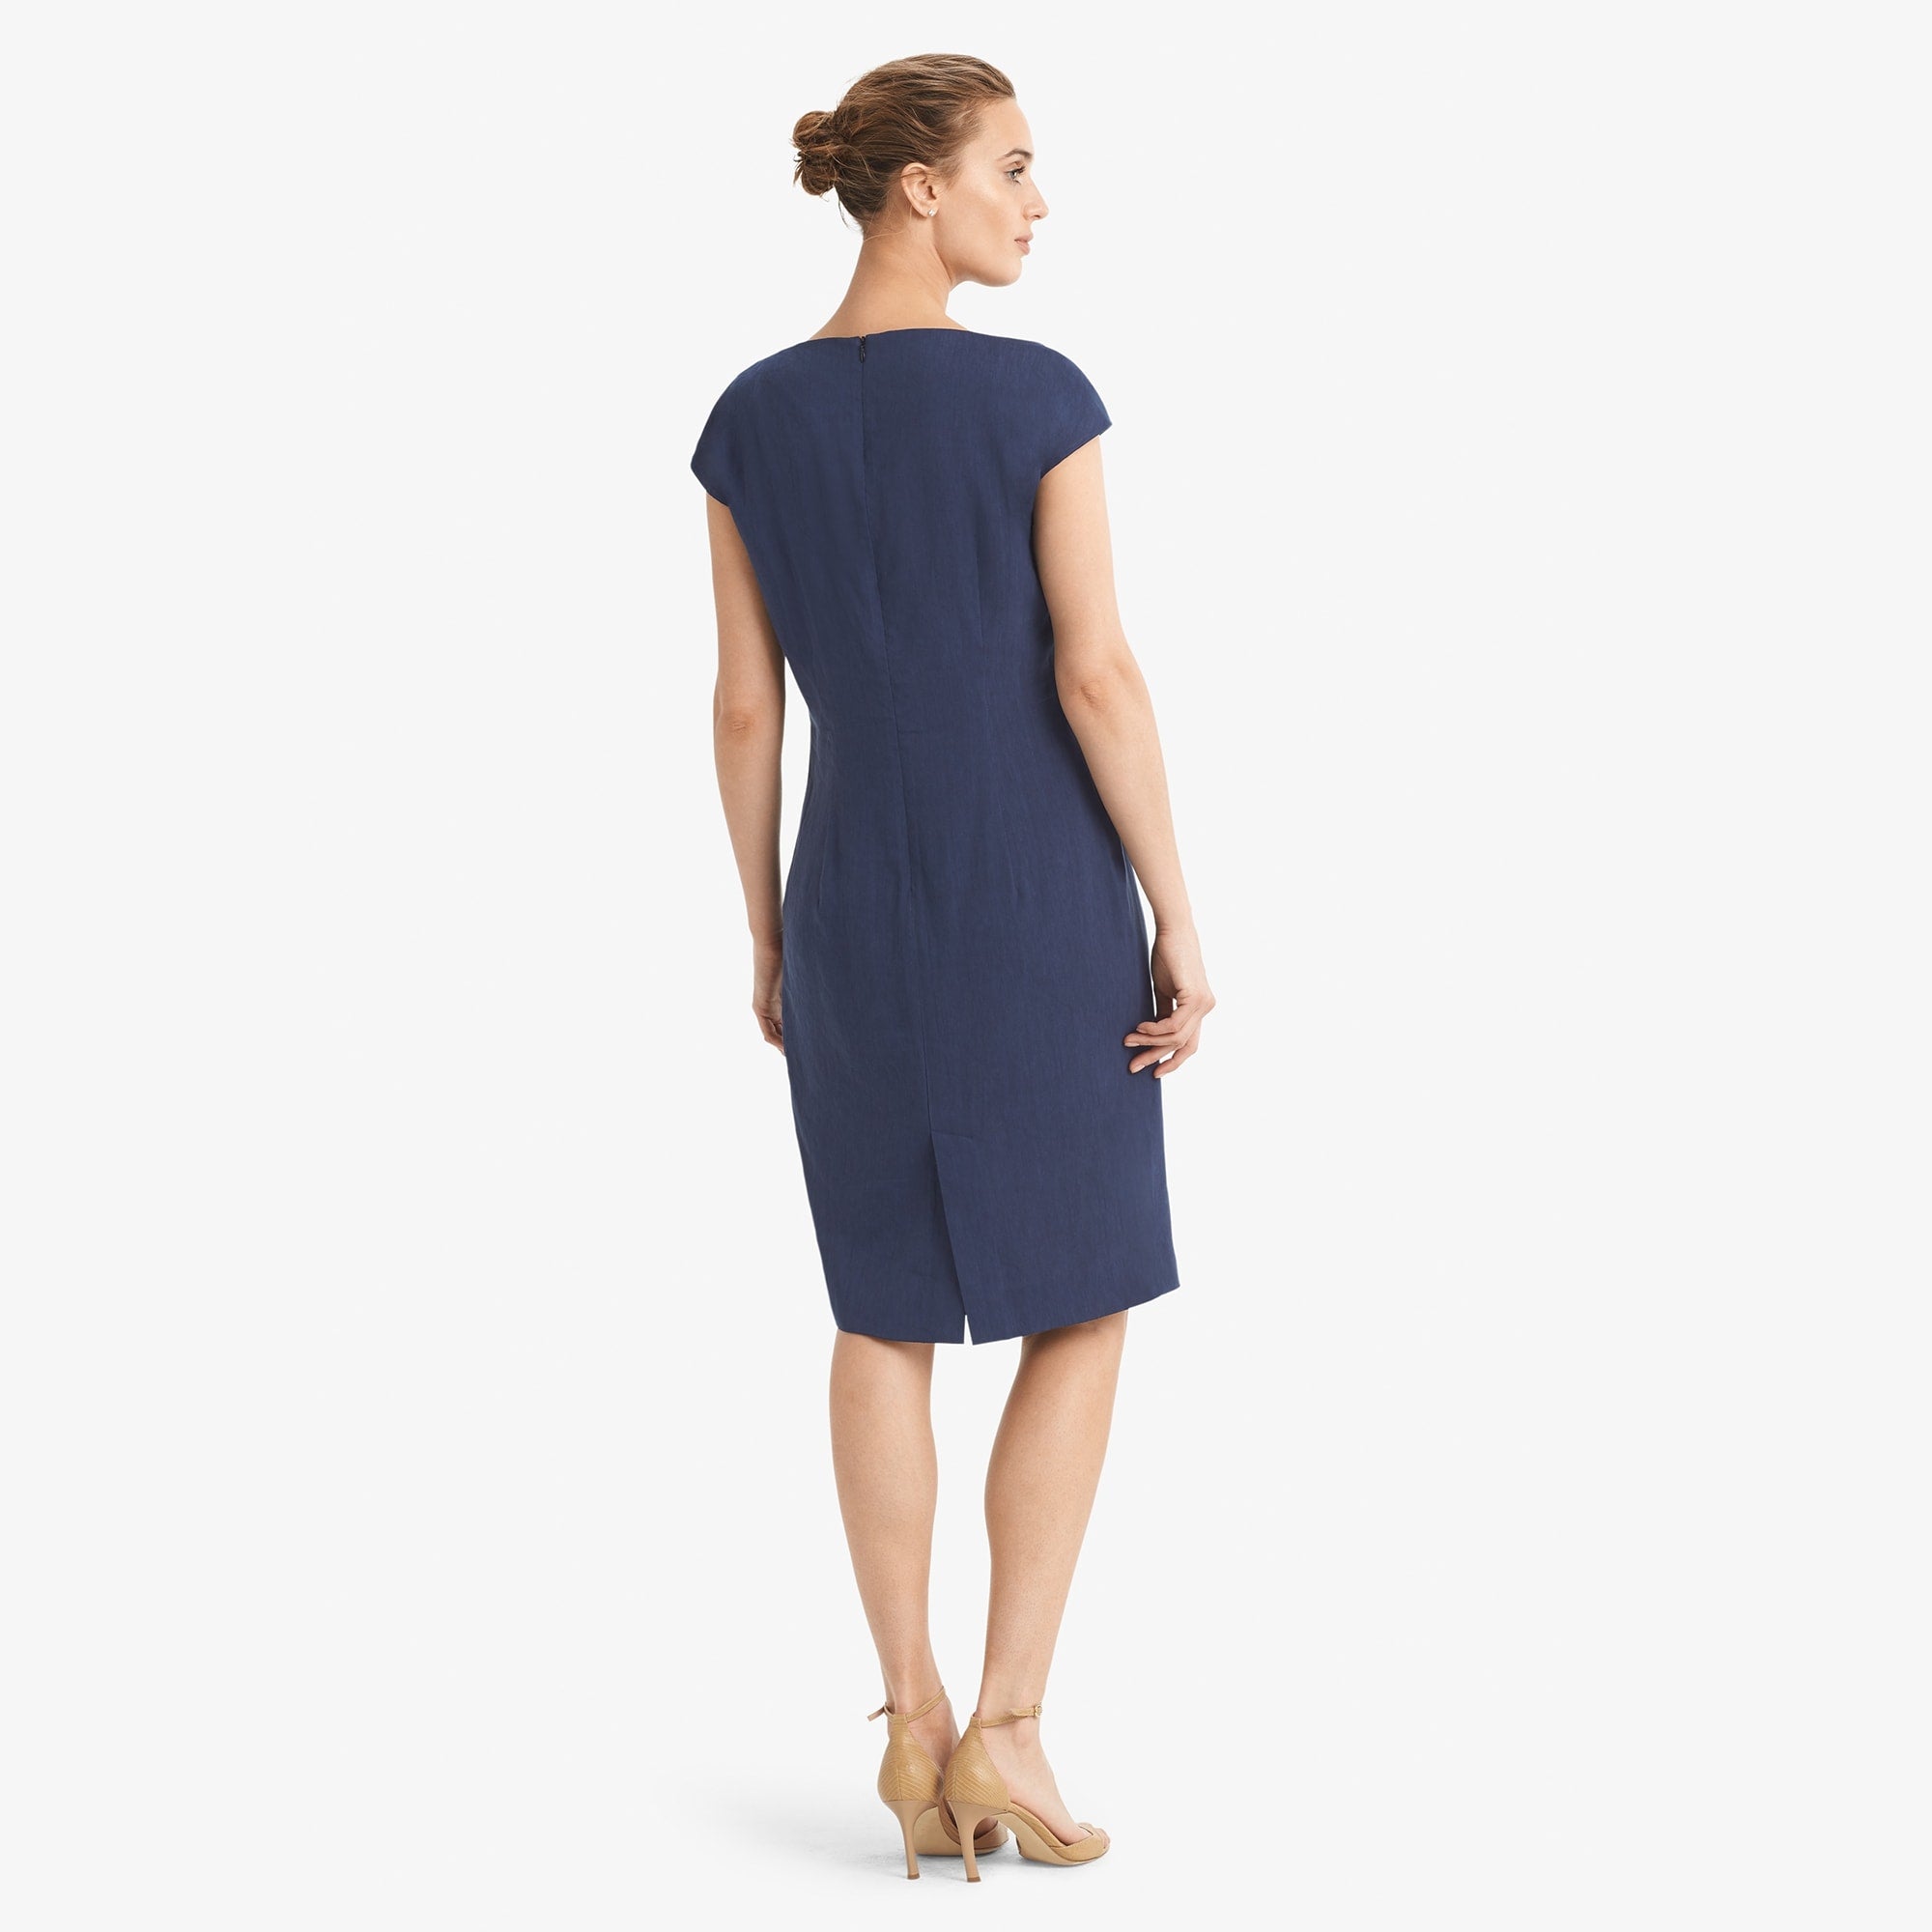 Back image of a woman standing wearing the Marilyn dress stretch linen in blueberry